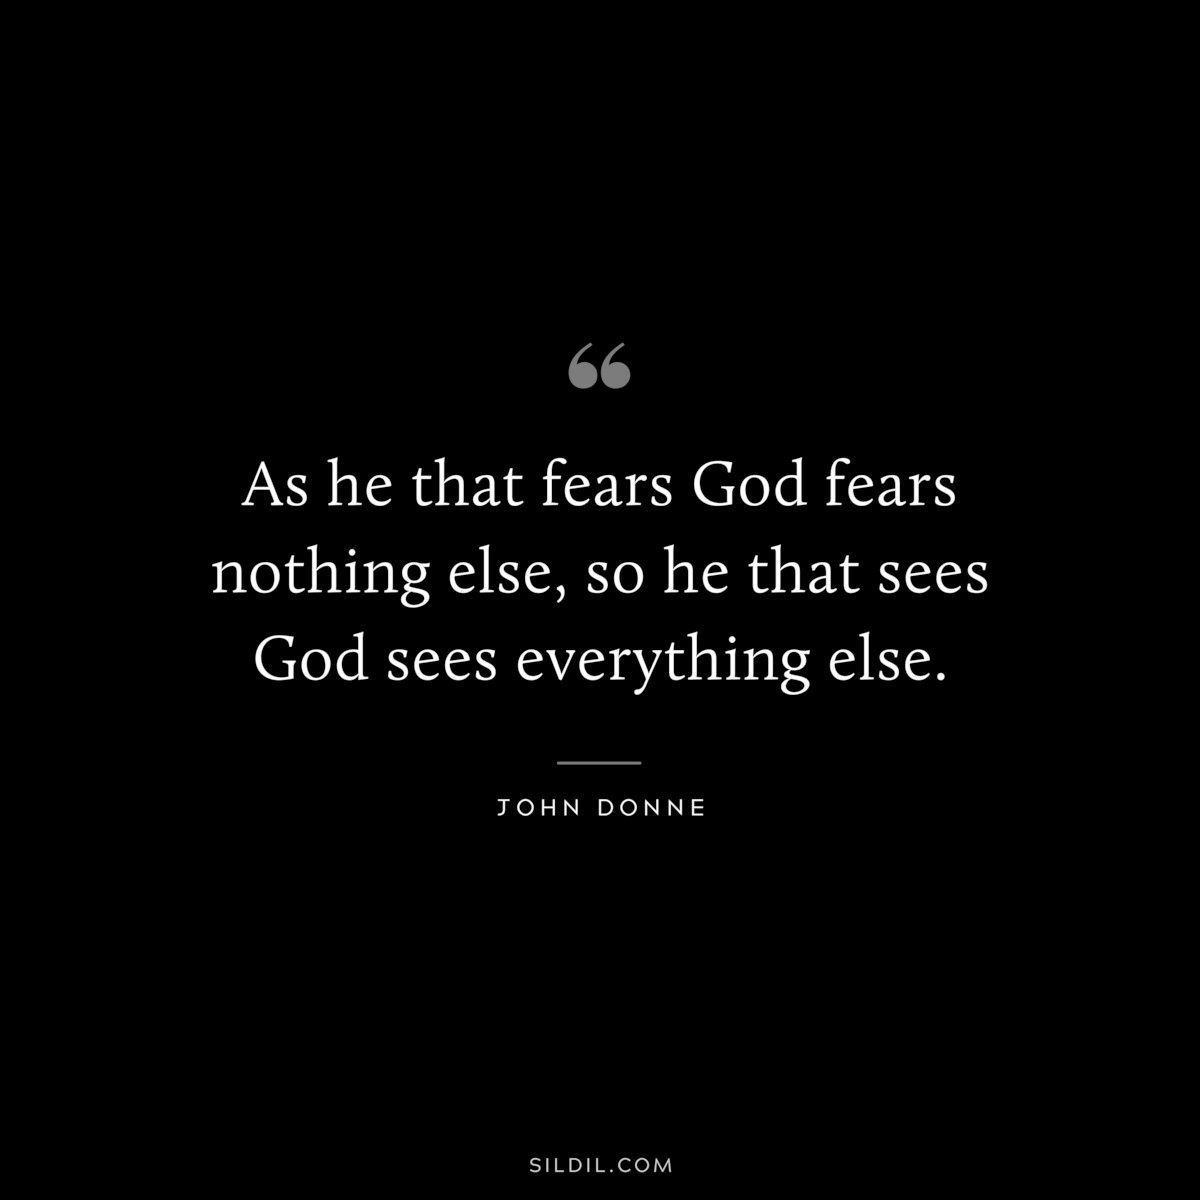 As he that fears God fears nothing else, so he that sees God sees everything else. ― John Donne